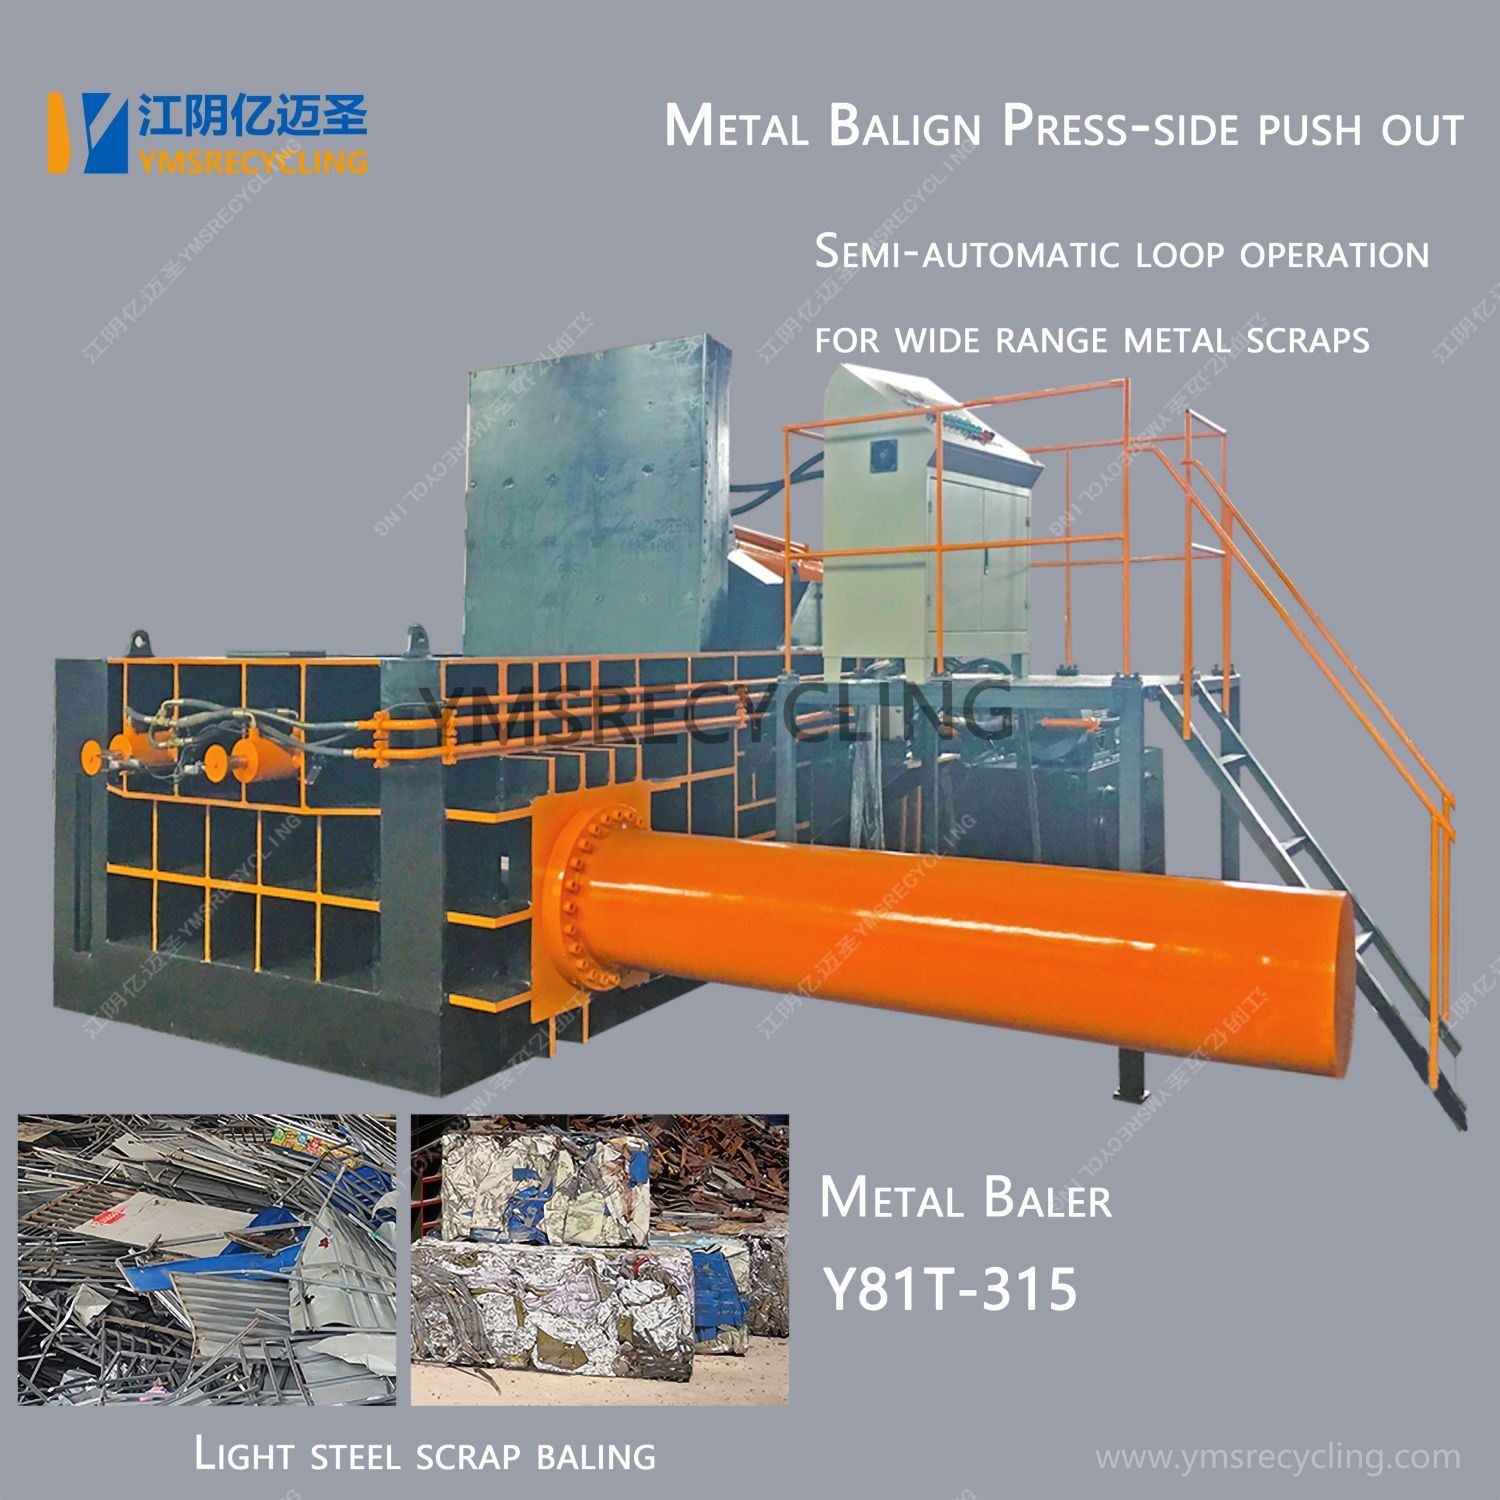 How to ensure that the hydraulic metal baler maintains efficient working condition when processing metal scrap?